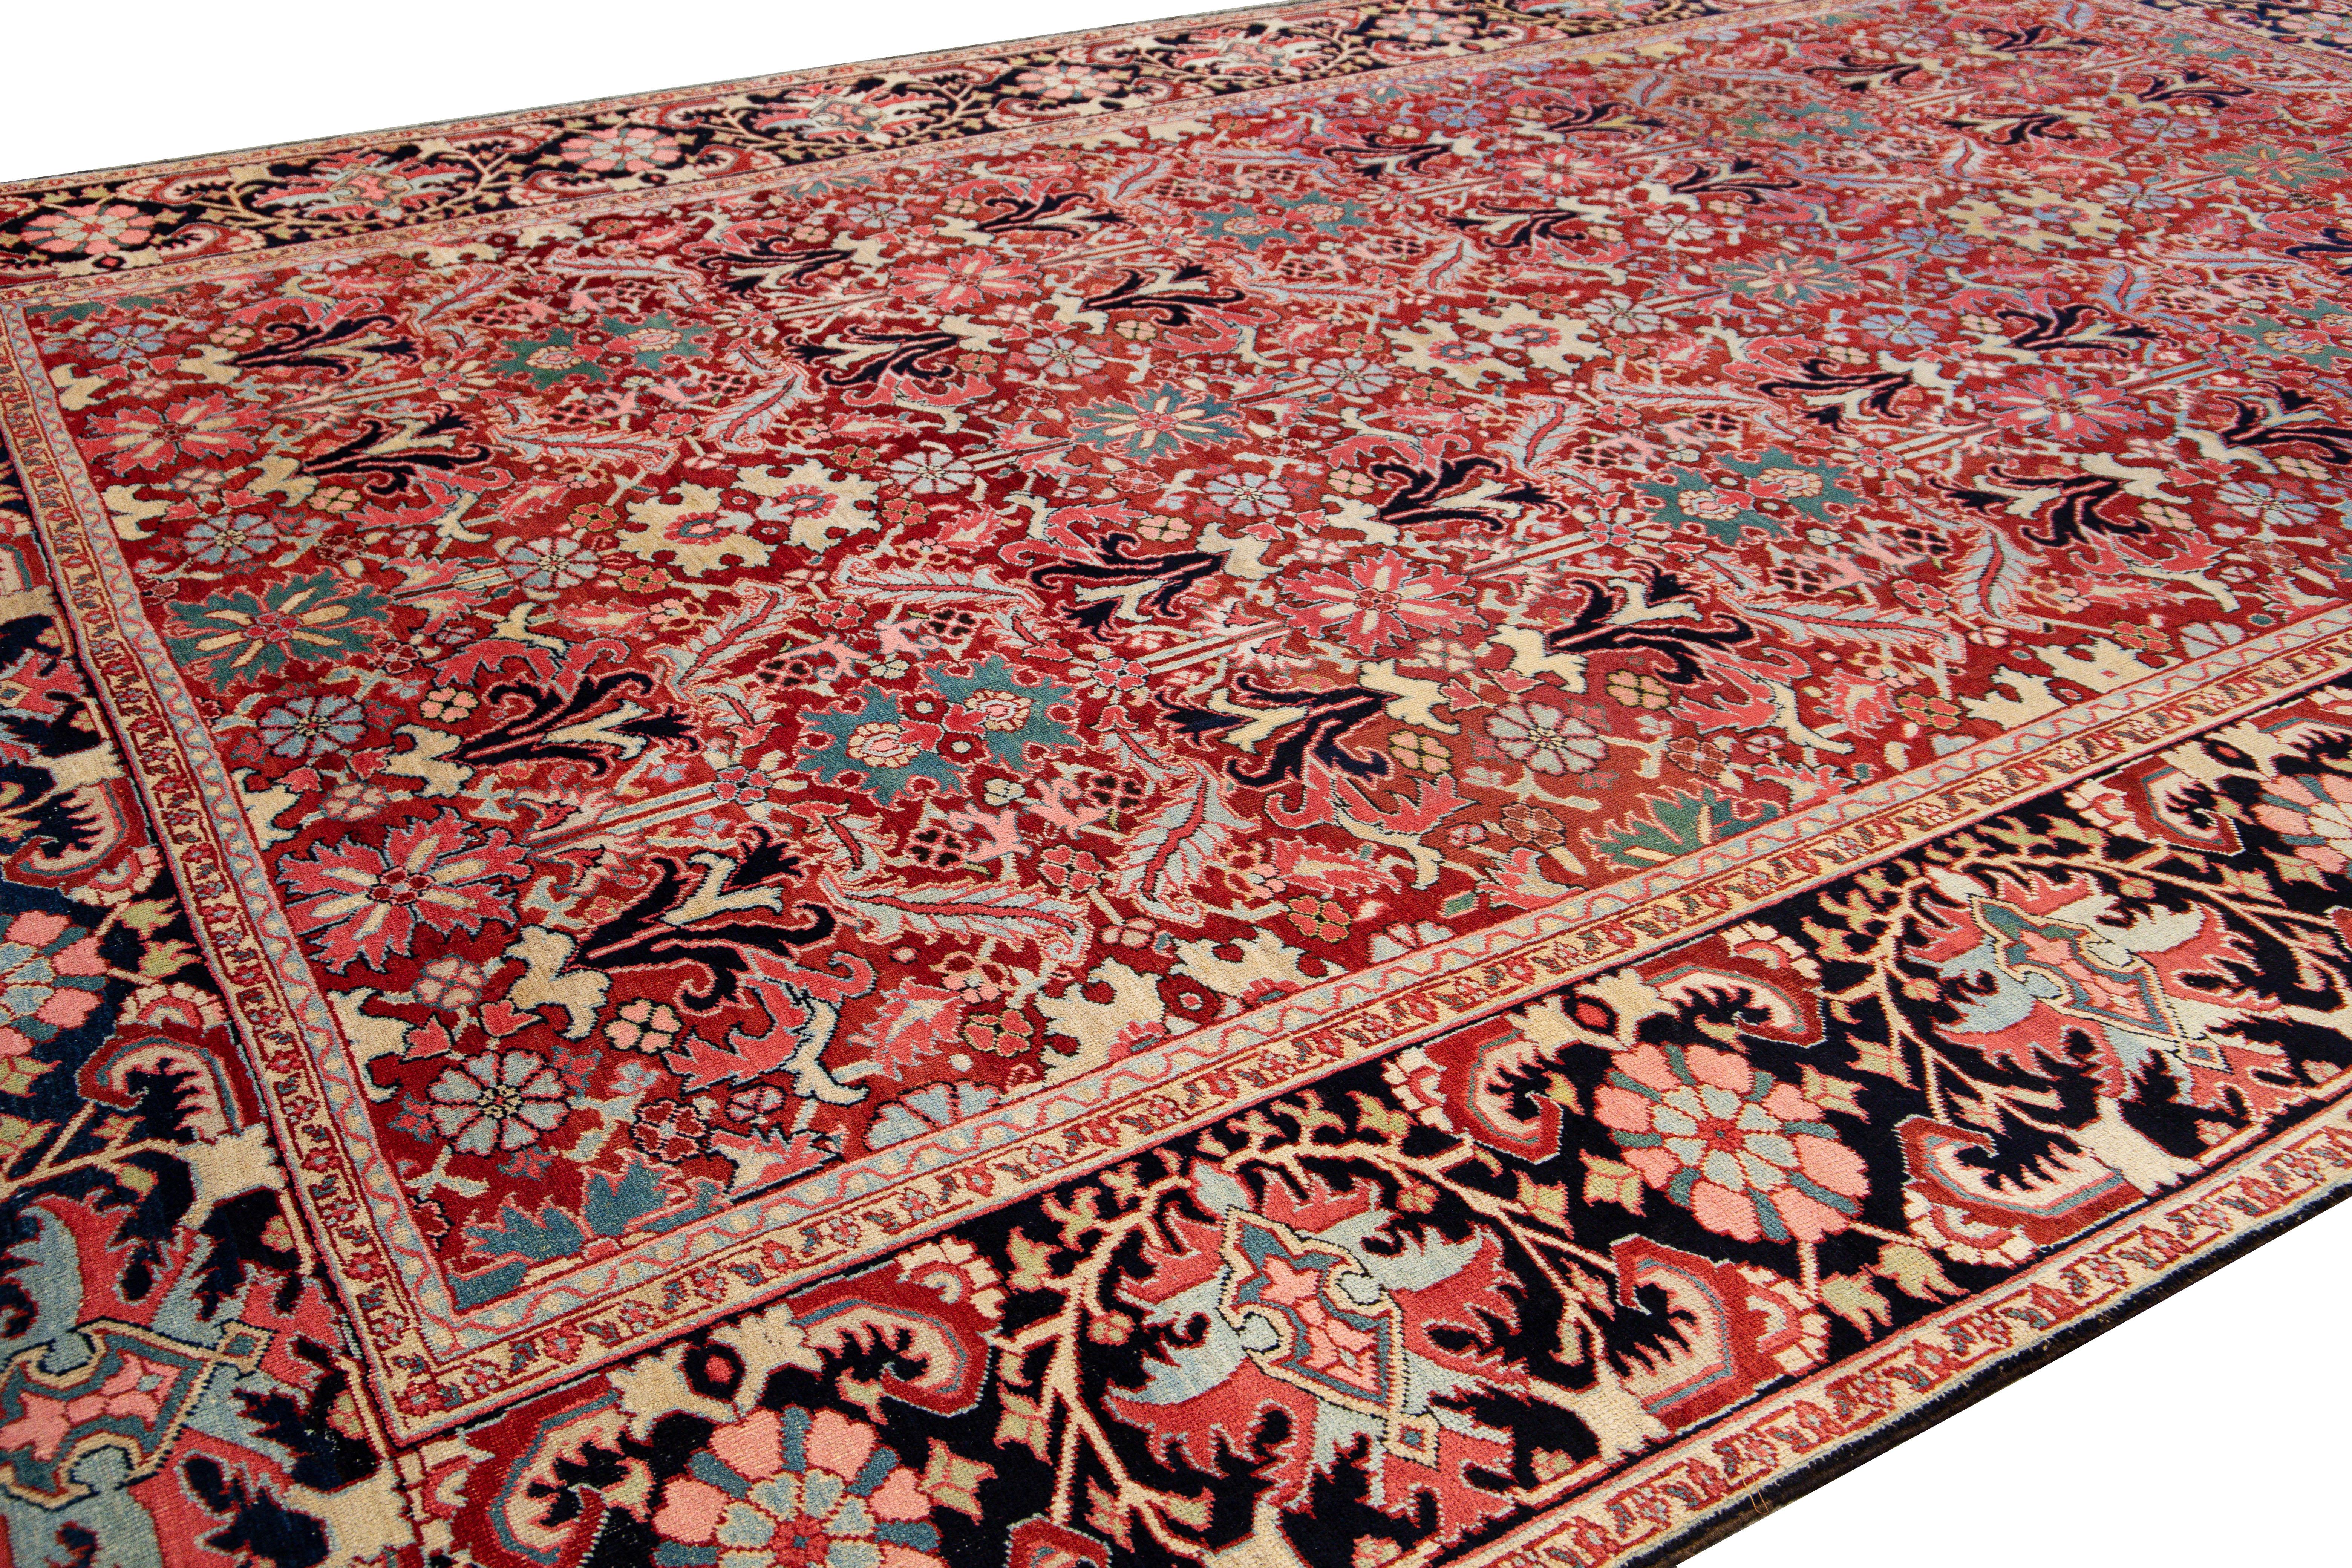 Antique Persian Heriz Handmade Multicolor Floral Designed Red Oversize Wool Rug In Excellent Condition For Sale In Norwalk, CT